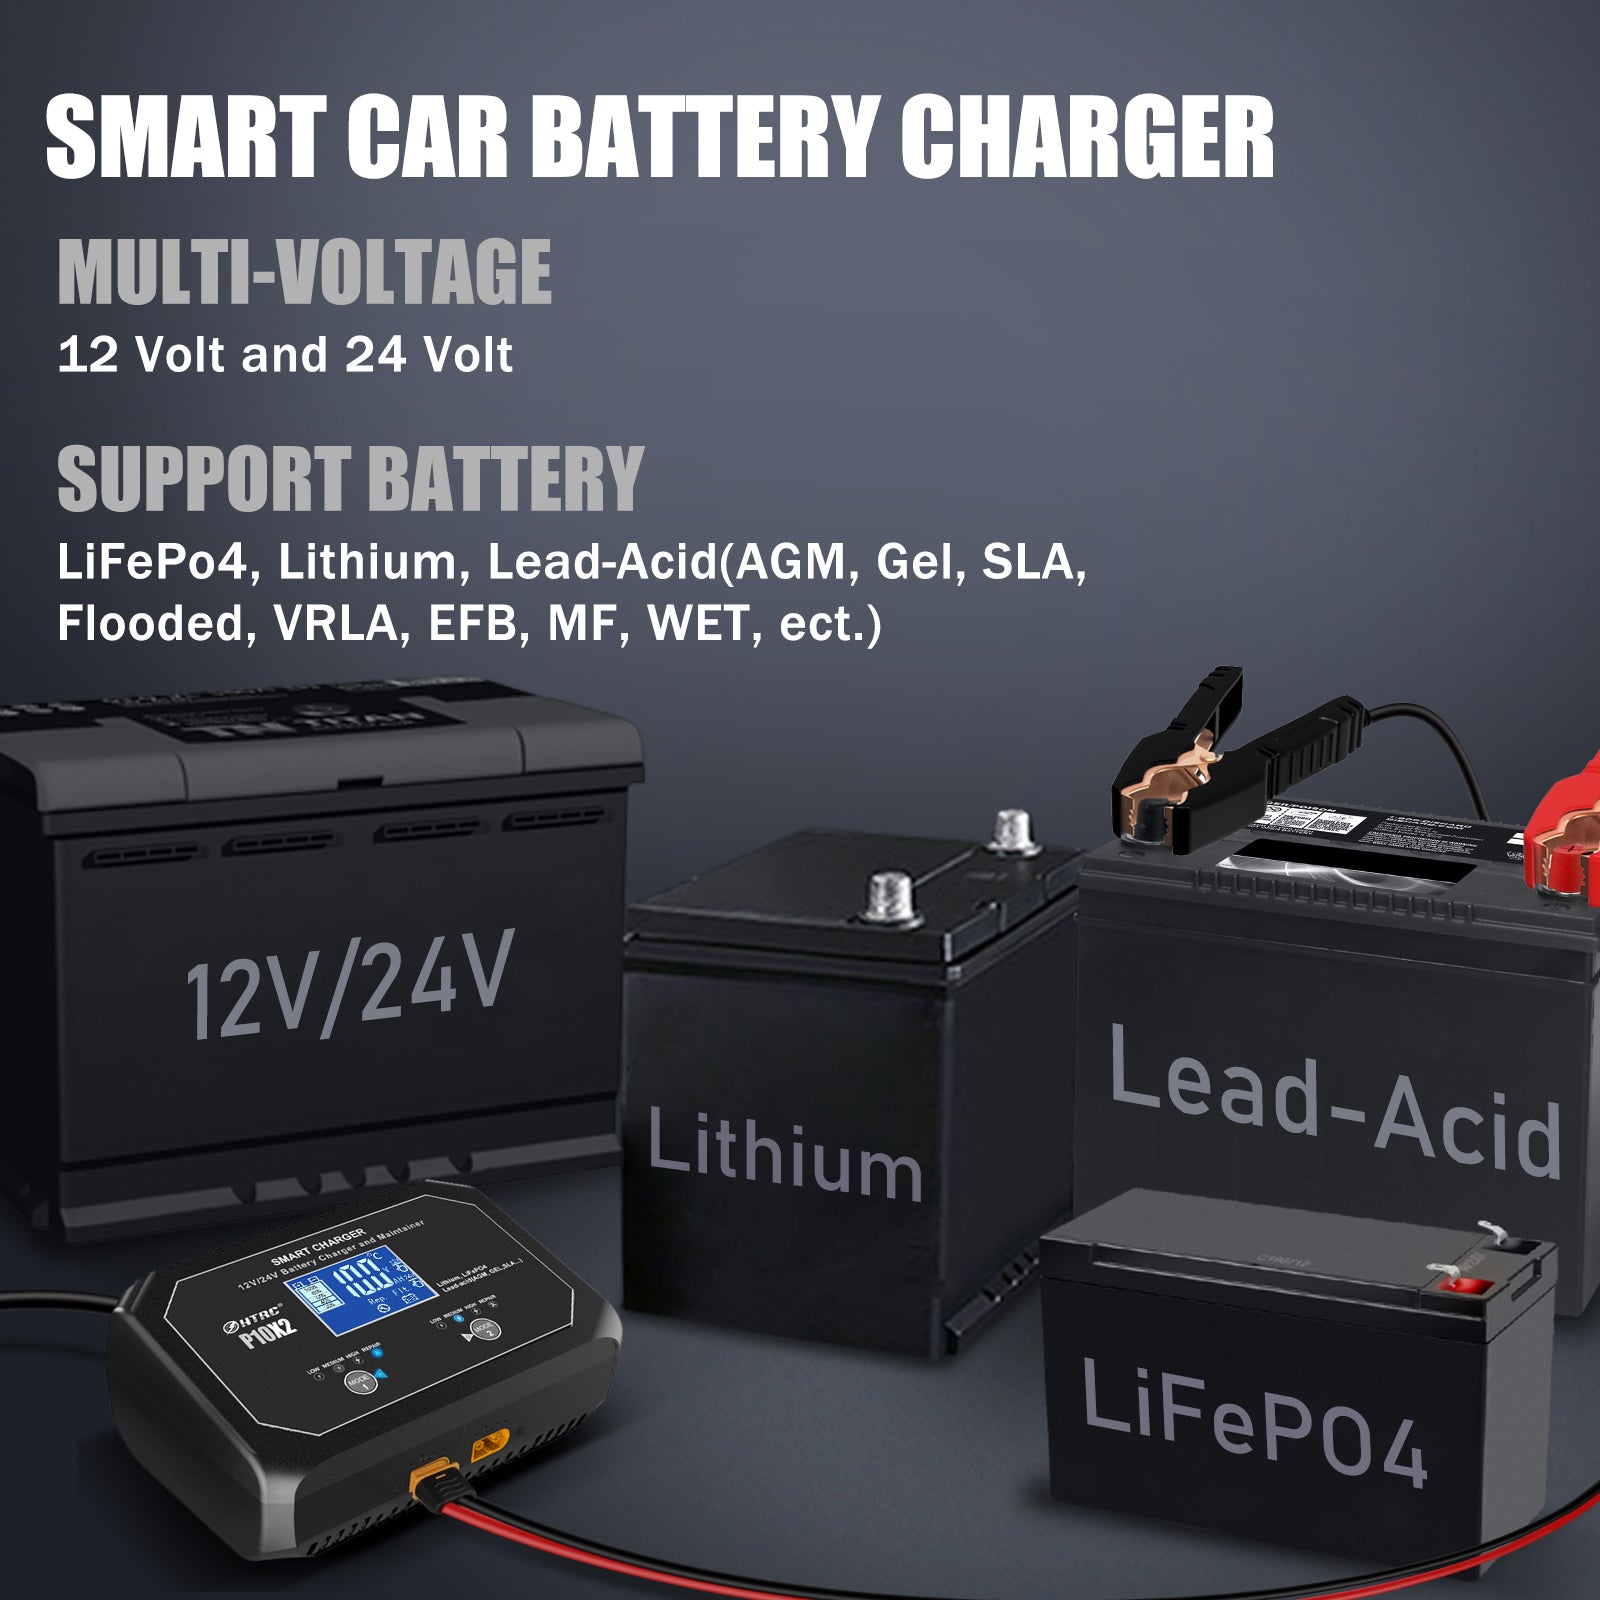 5A & 10A 12V Smart Battery Charger with LCD Display for Lithium (LiFePO4)  Batteries